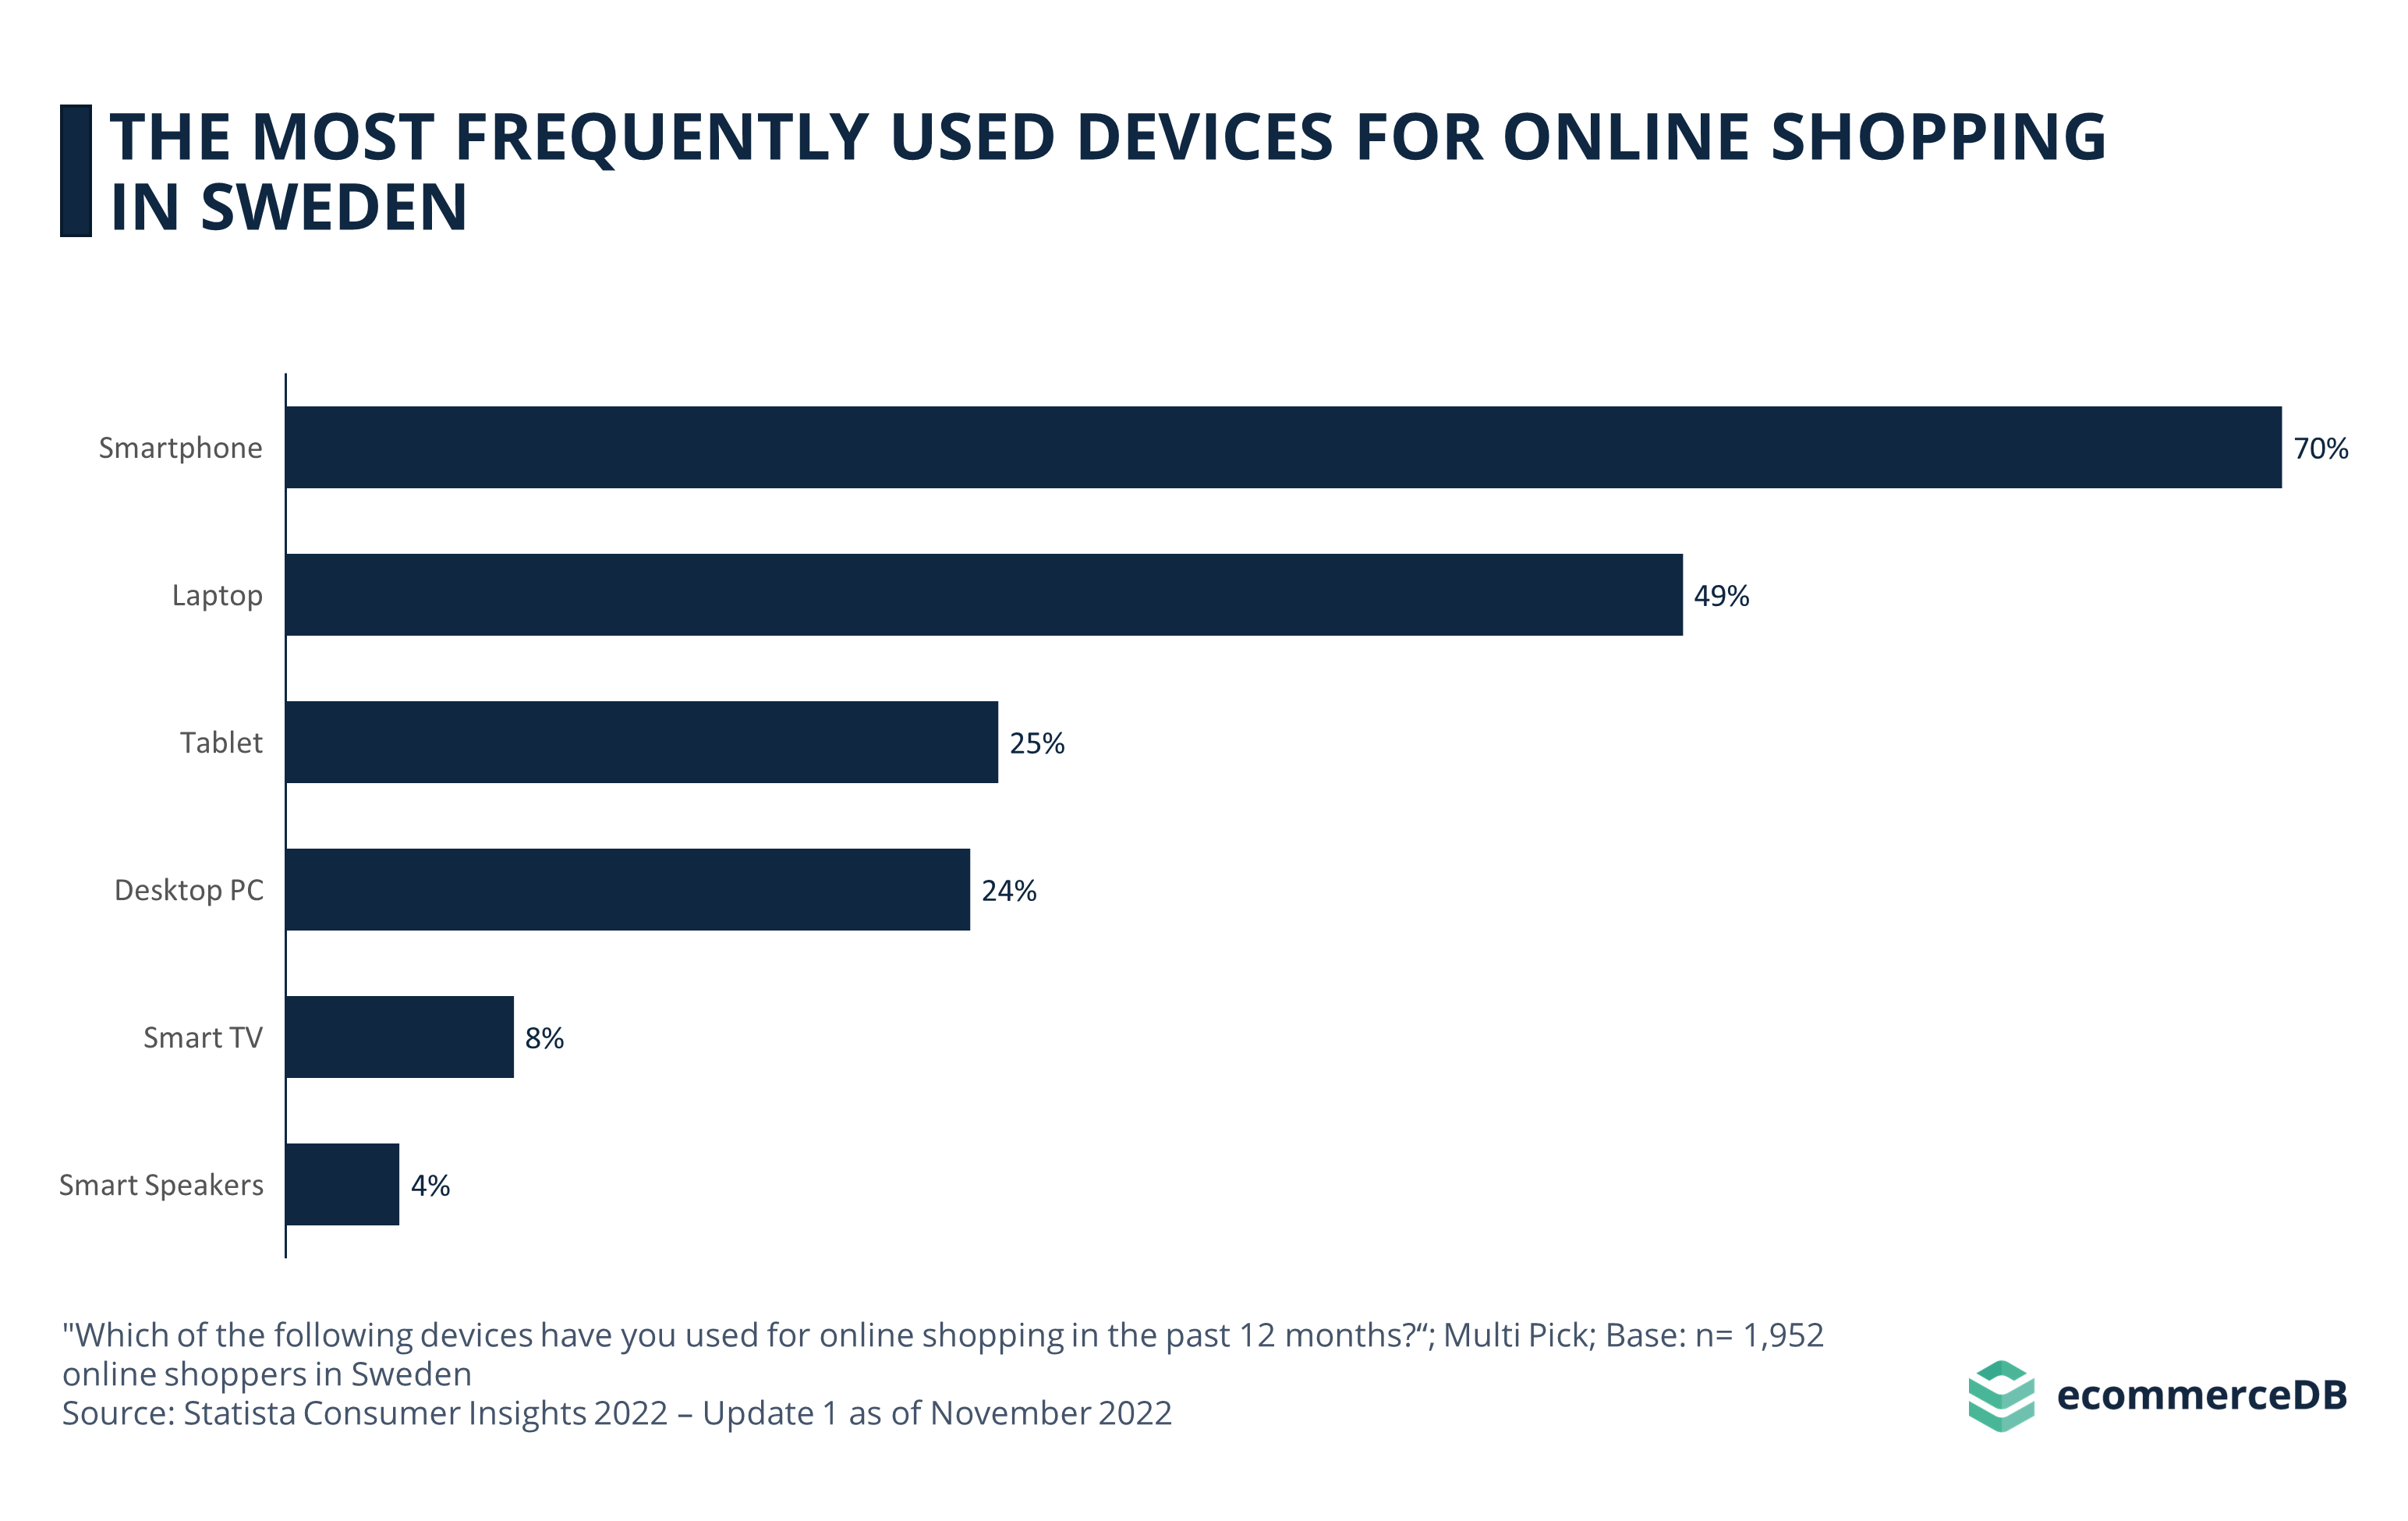 The Most Frequently Used Devices for Online Shopping in Sweden